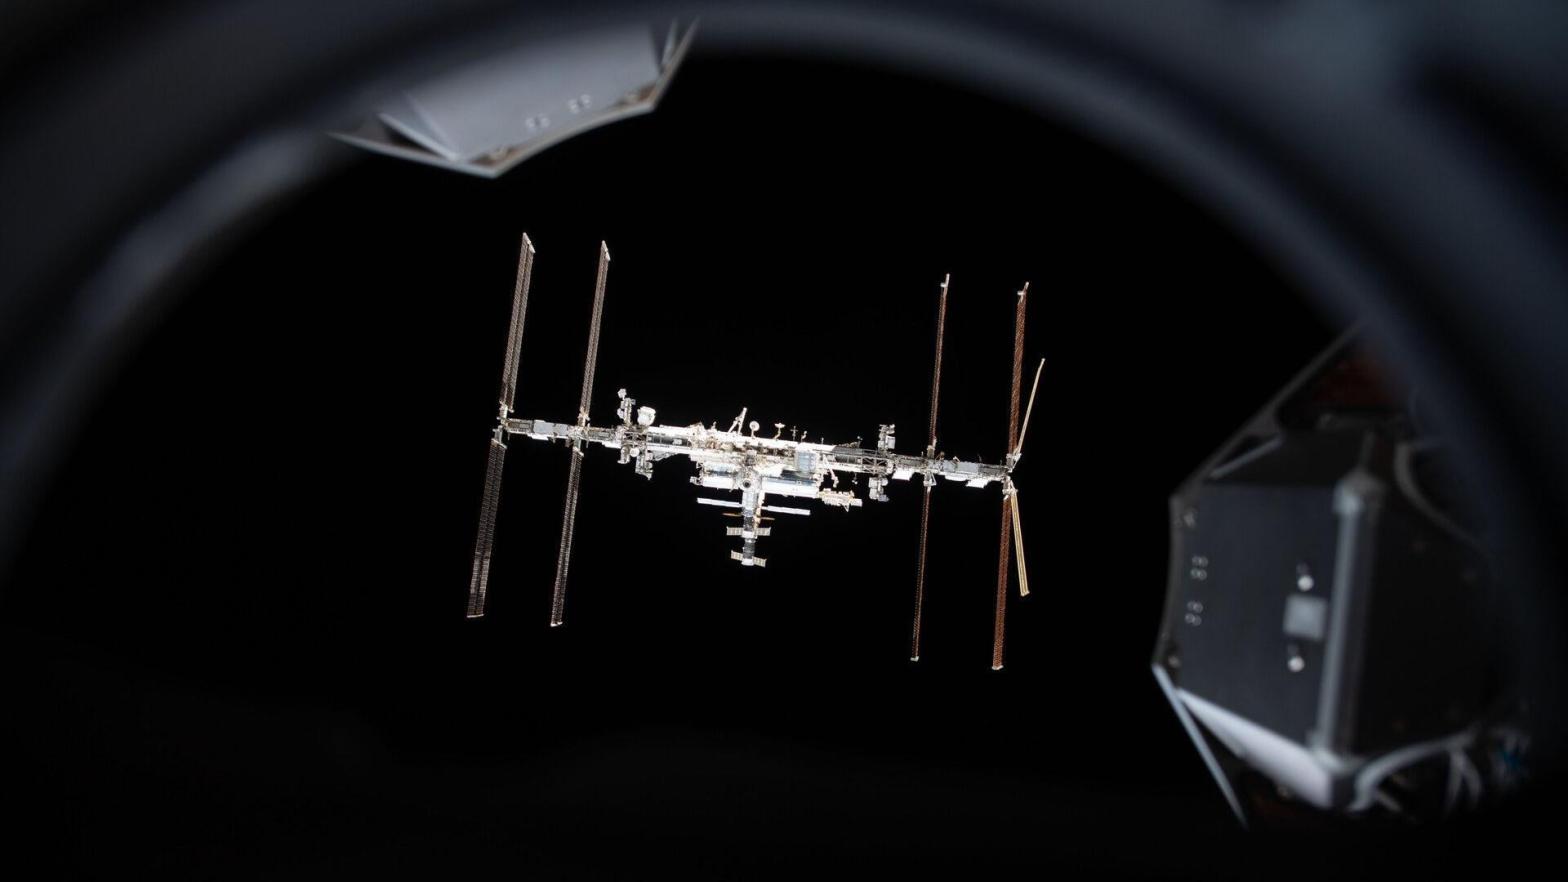 The ISS captured by ESA astronaut Thomas Pesquet from the SpaceX Crew Dragon Endeavour. (Photo: ESA)